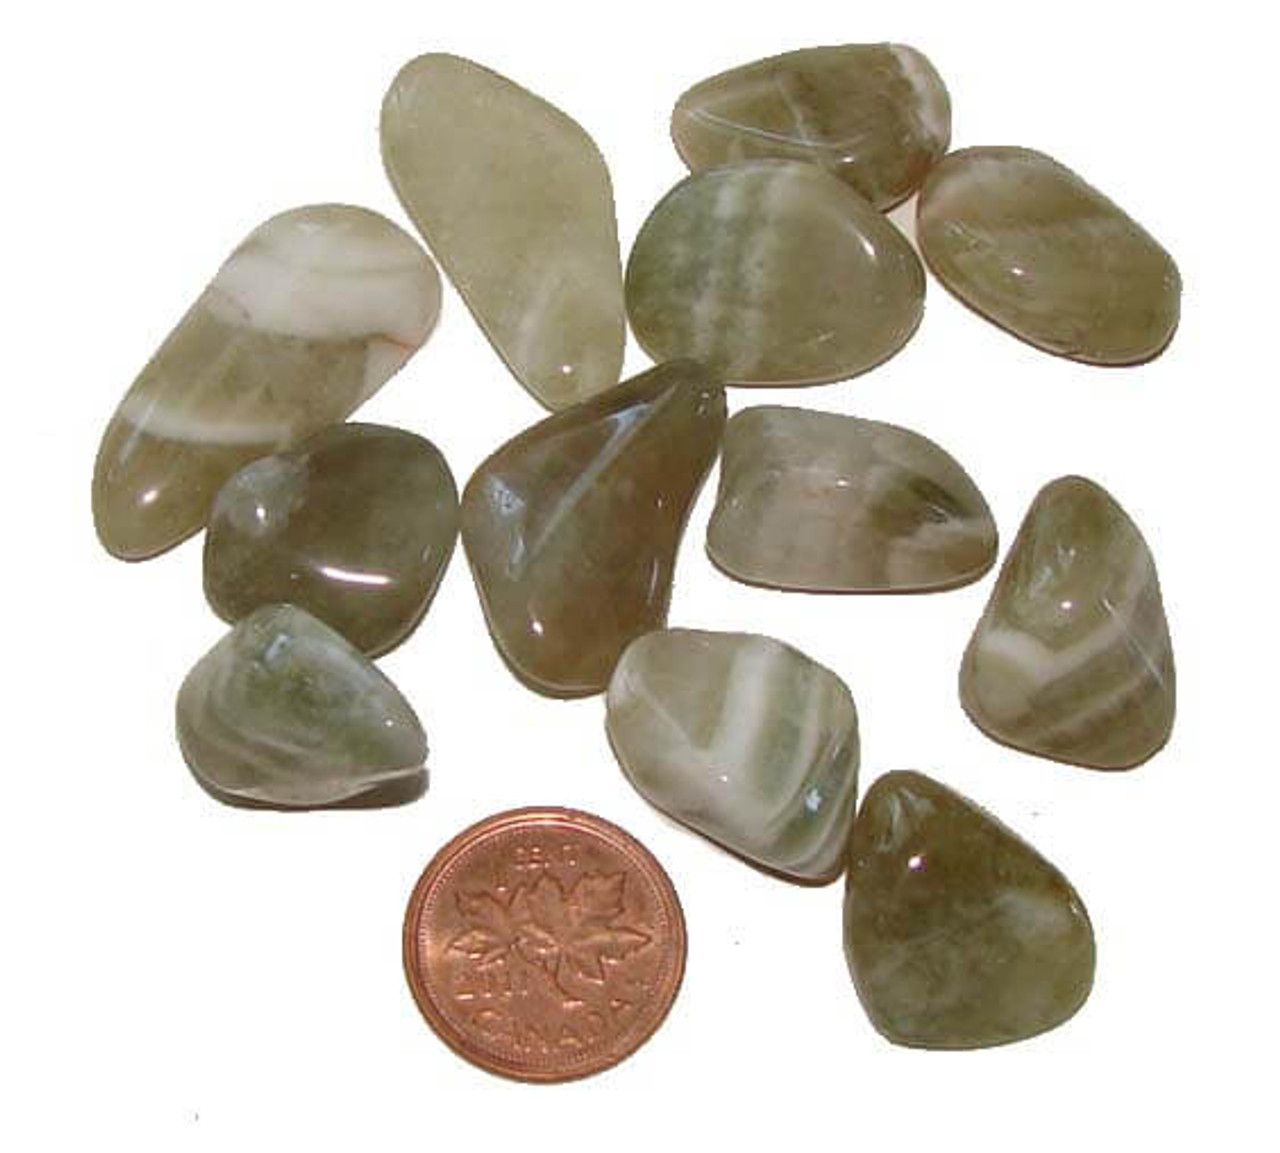 Where to Buy Tumbled Prasiolite - Meaning of Stones